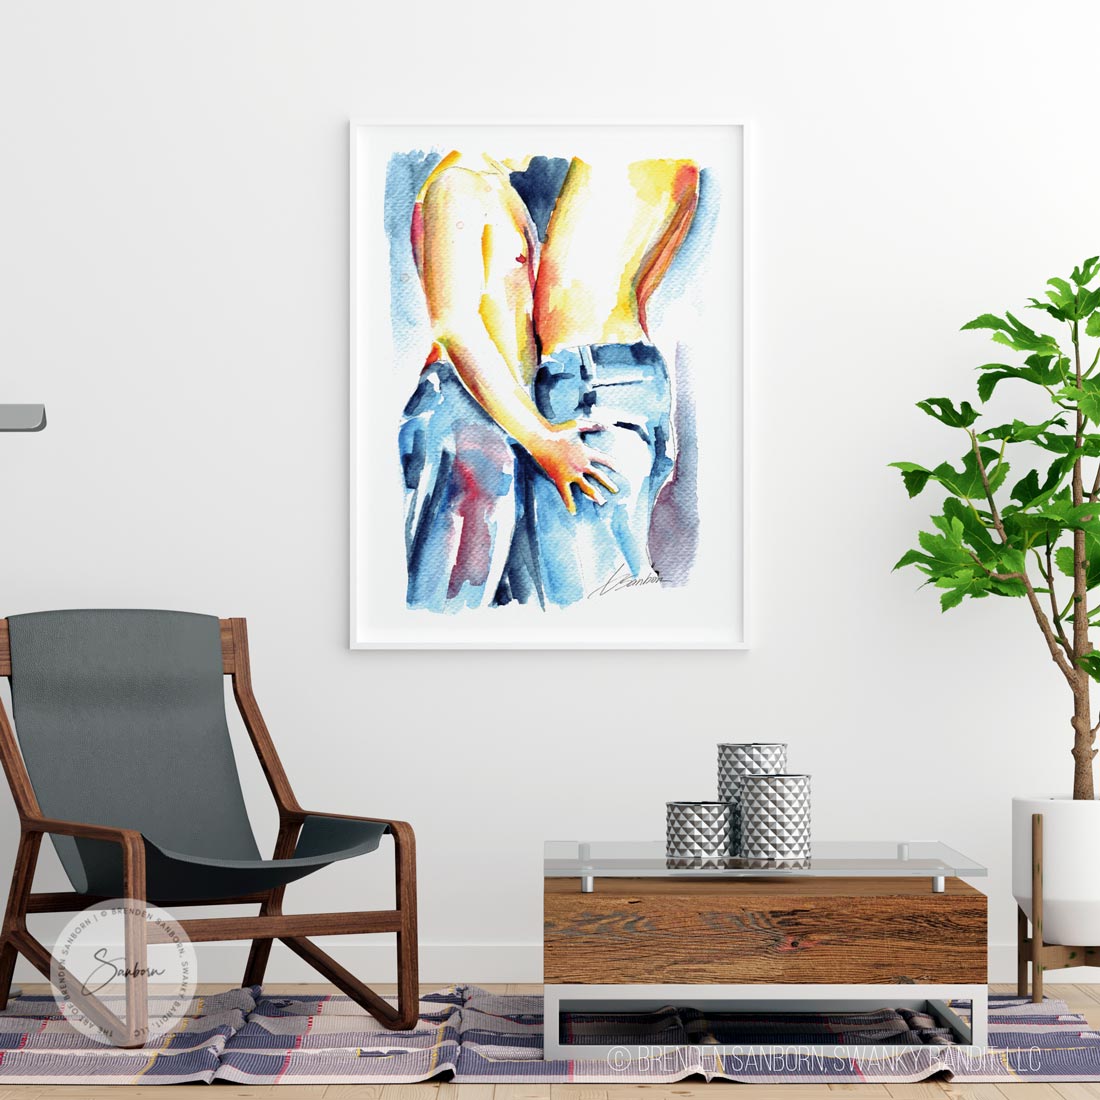 Male Nude Lovers: Passionate Embrace & Intimate Connection - Giclee Art Print